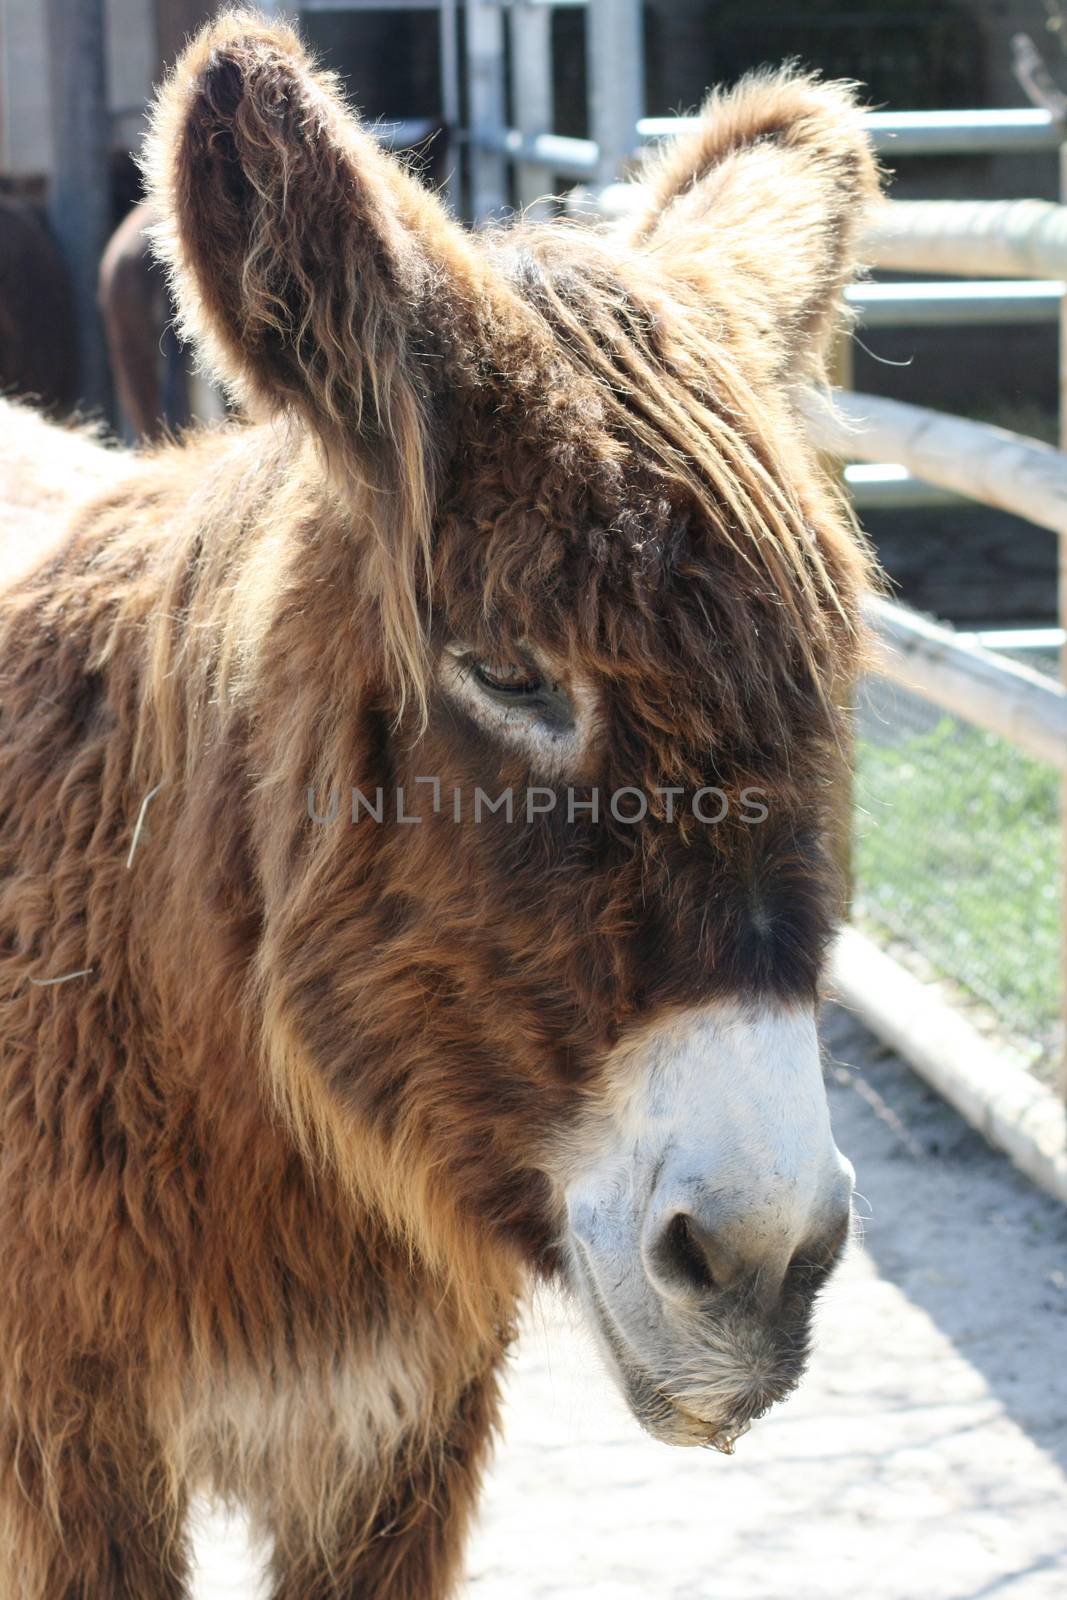 Portrait shot of a brown donkey with a white mouth by hadot